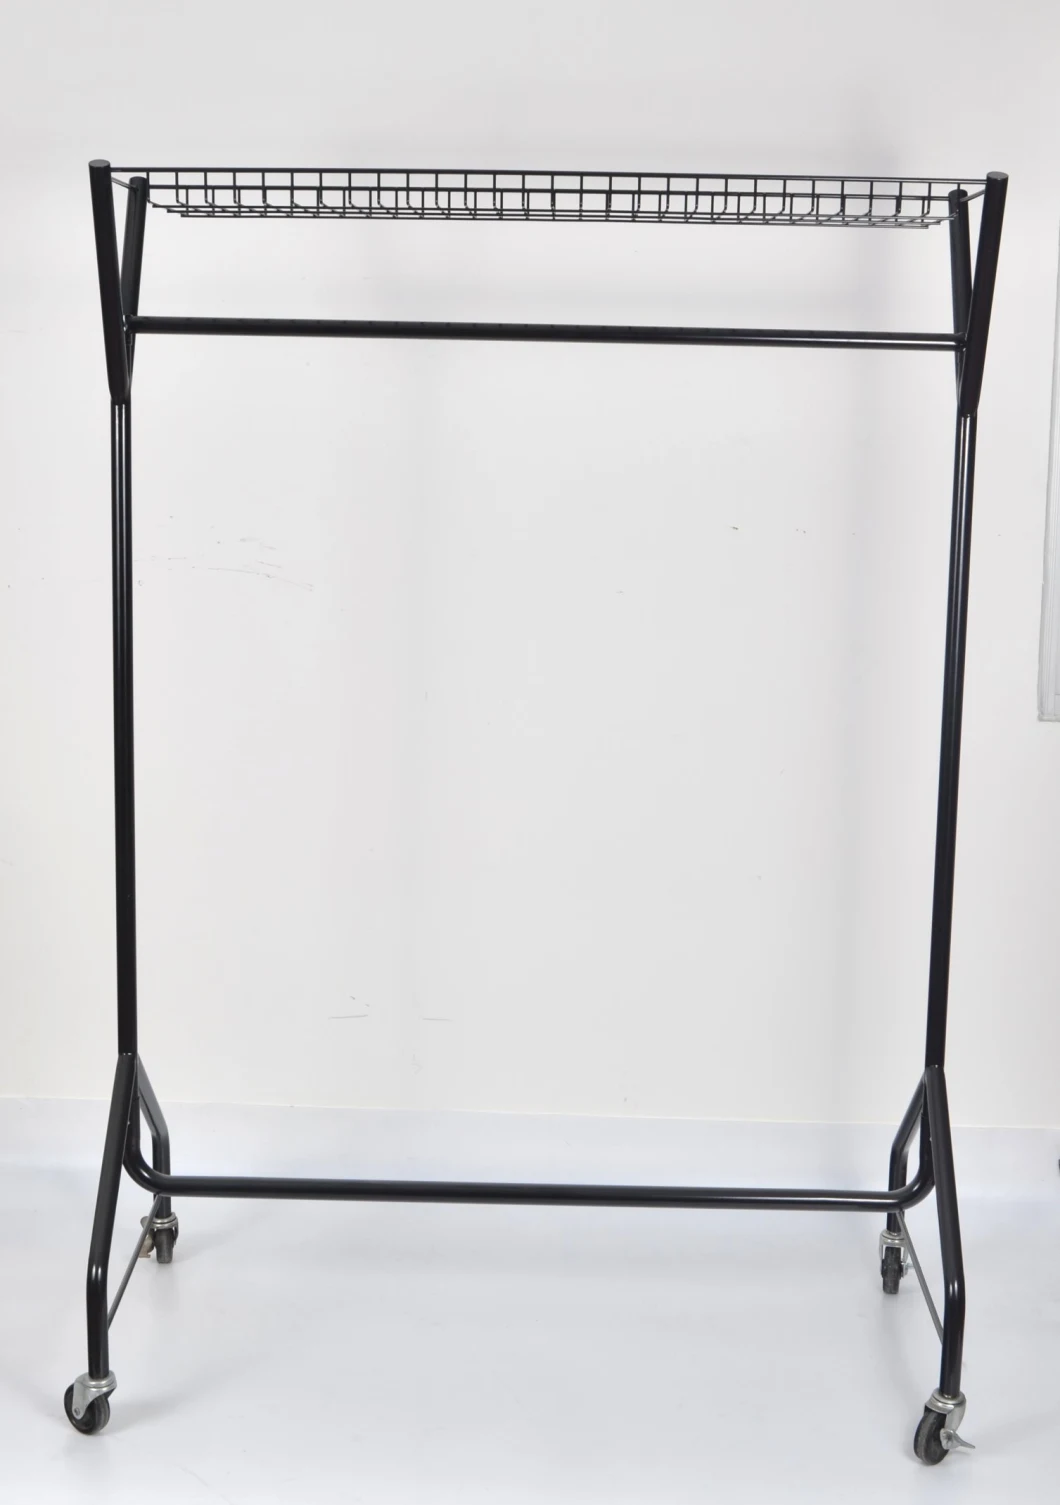 Movable Metal Rolling Clothes Hanging Rack & Homely Cloth Dryer Rack